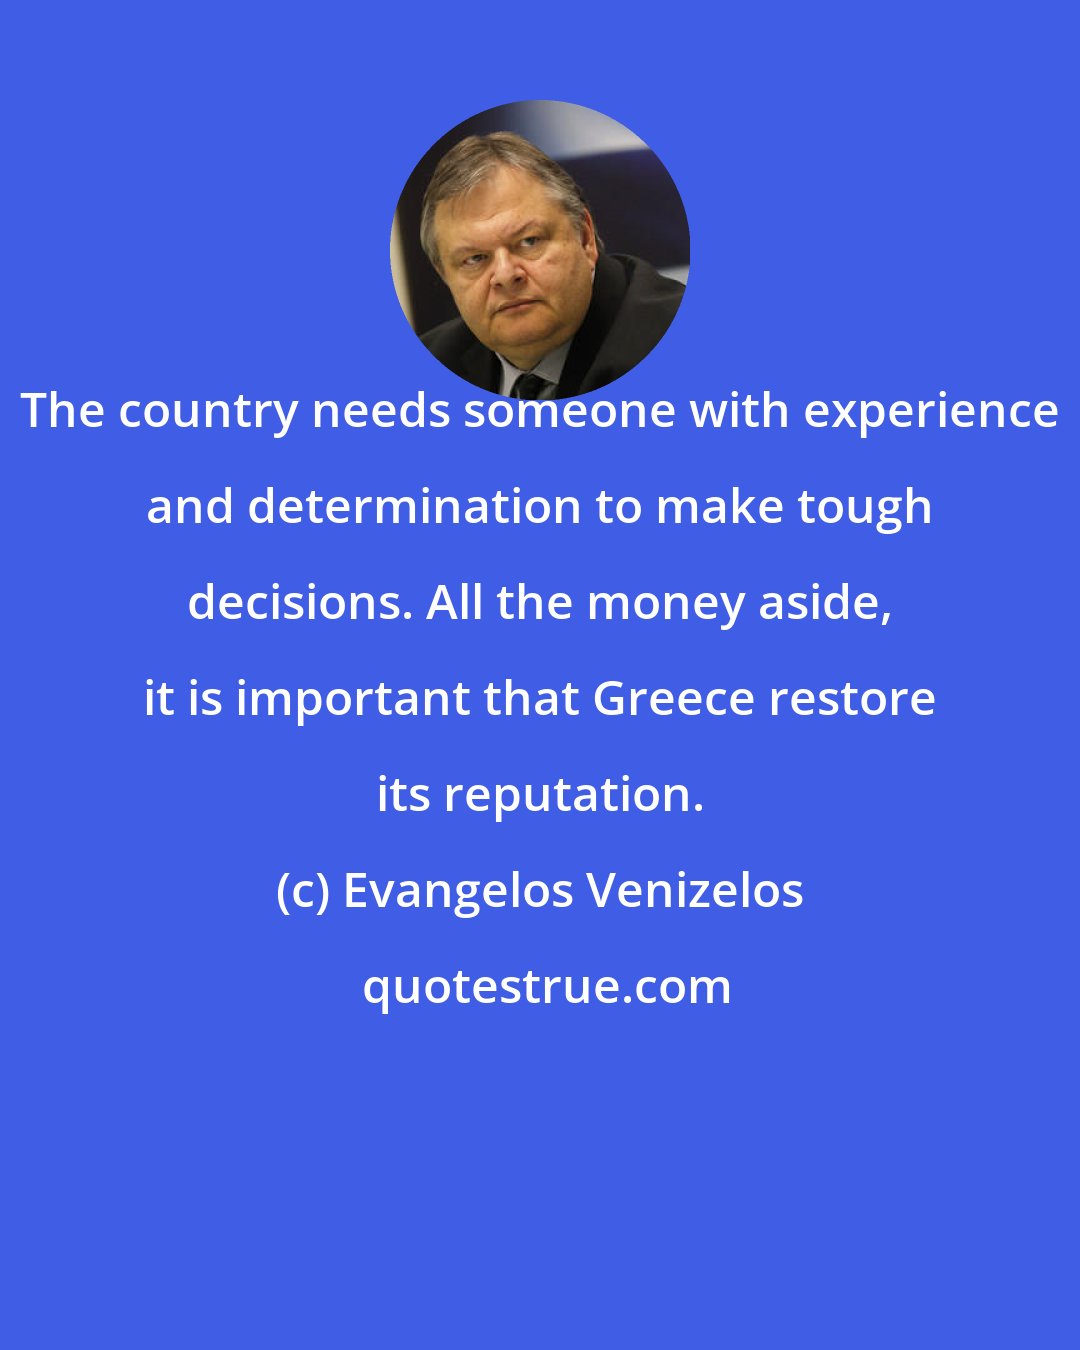 Evangelos Venizelos: The country needs someone with experience and determination to make tough decisions. All the money aside, it is important that Greece restore its reputation.